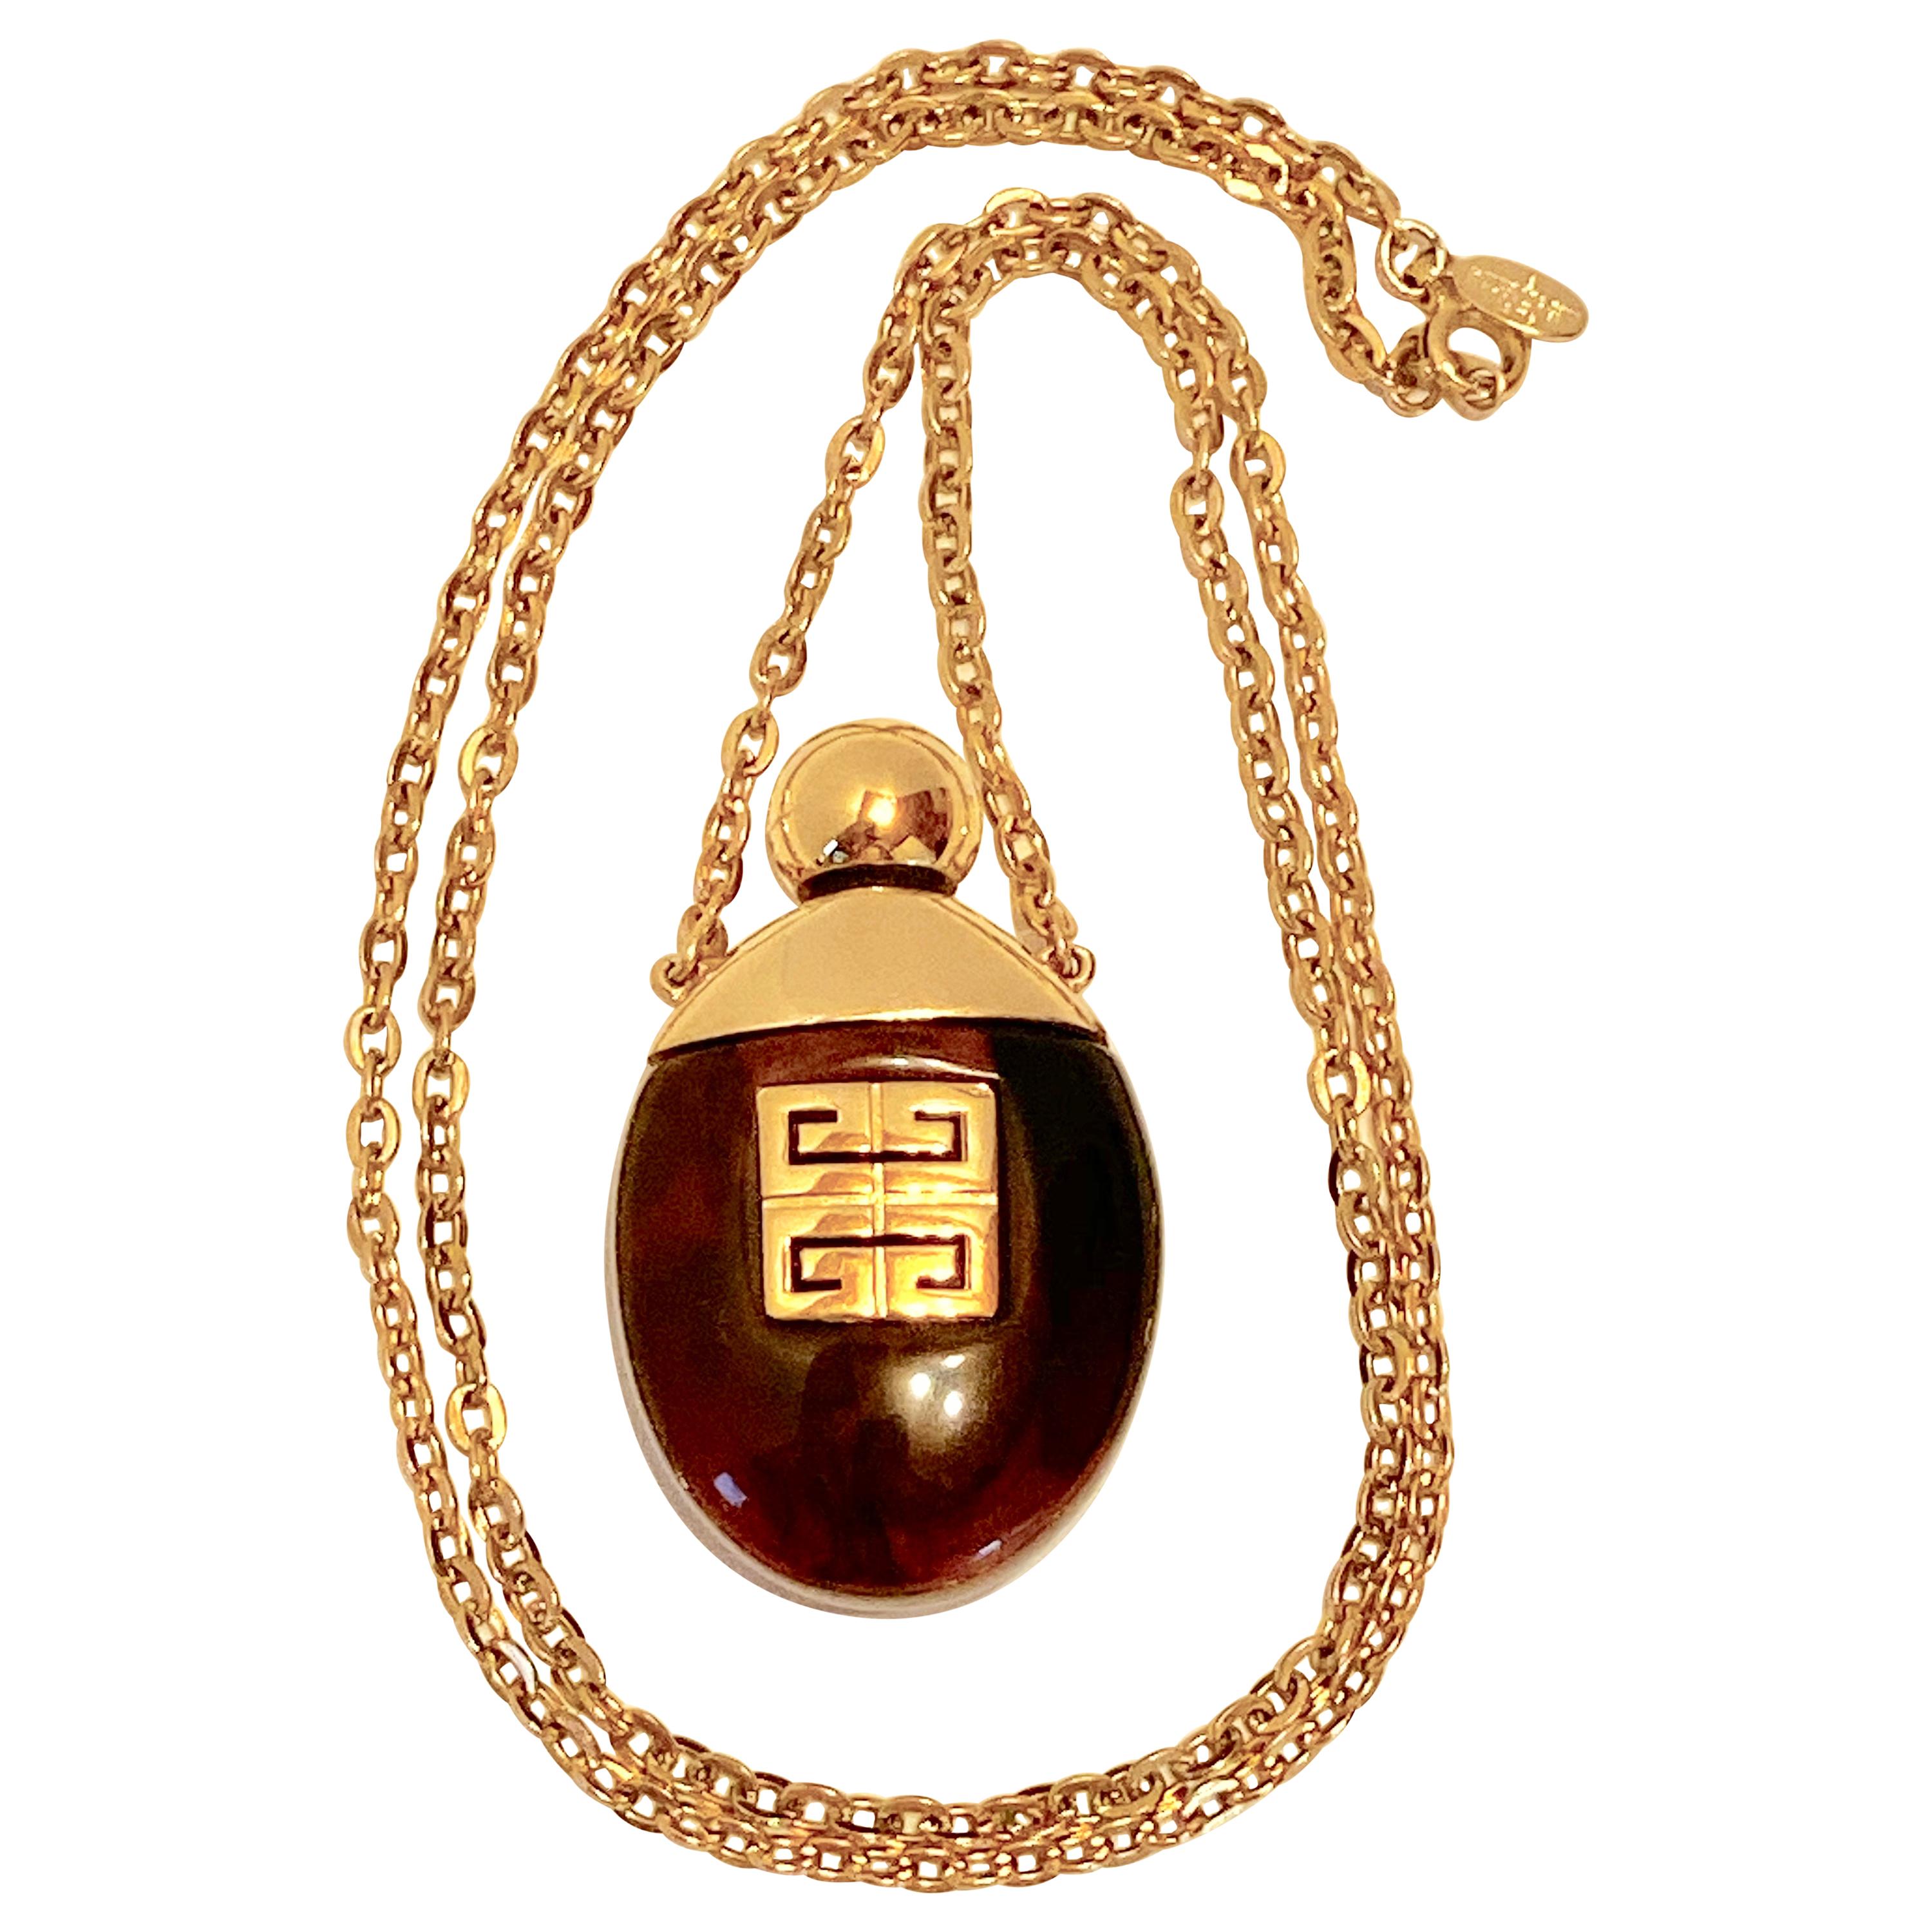 Givenchy "Limited Edition" 'Tortoise Shell' Lucite Perfume Pendant Necklace